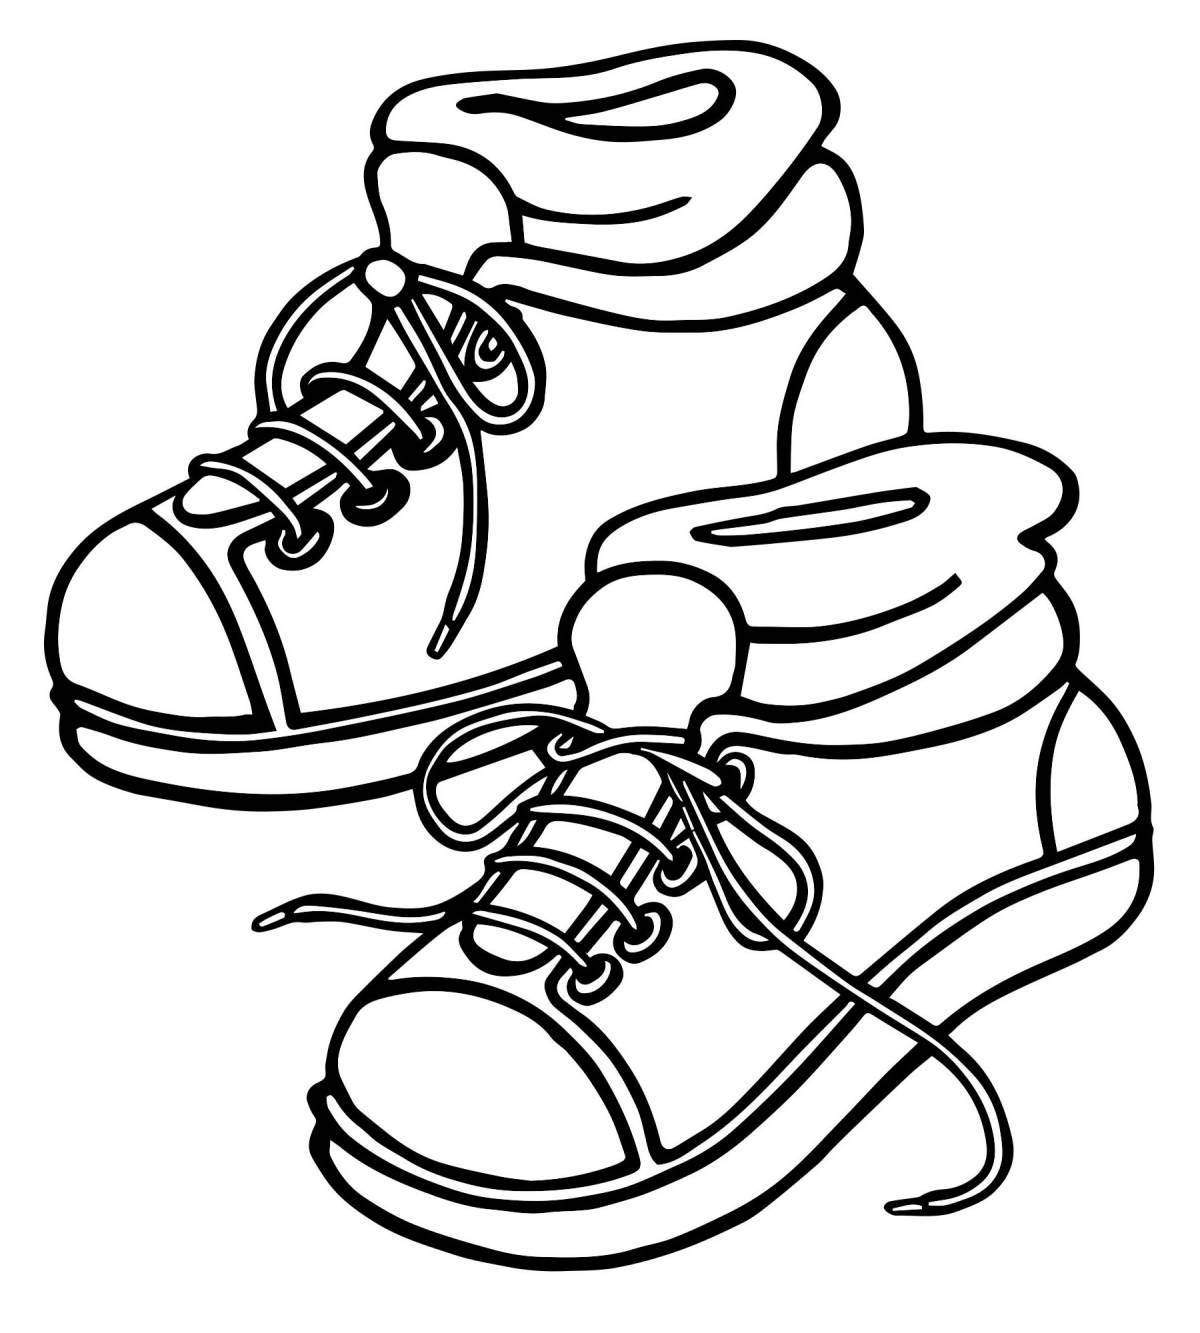 Coloring book shining sneakers for kids